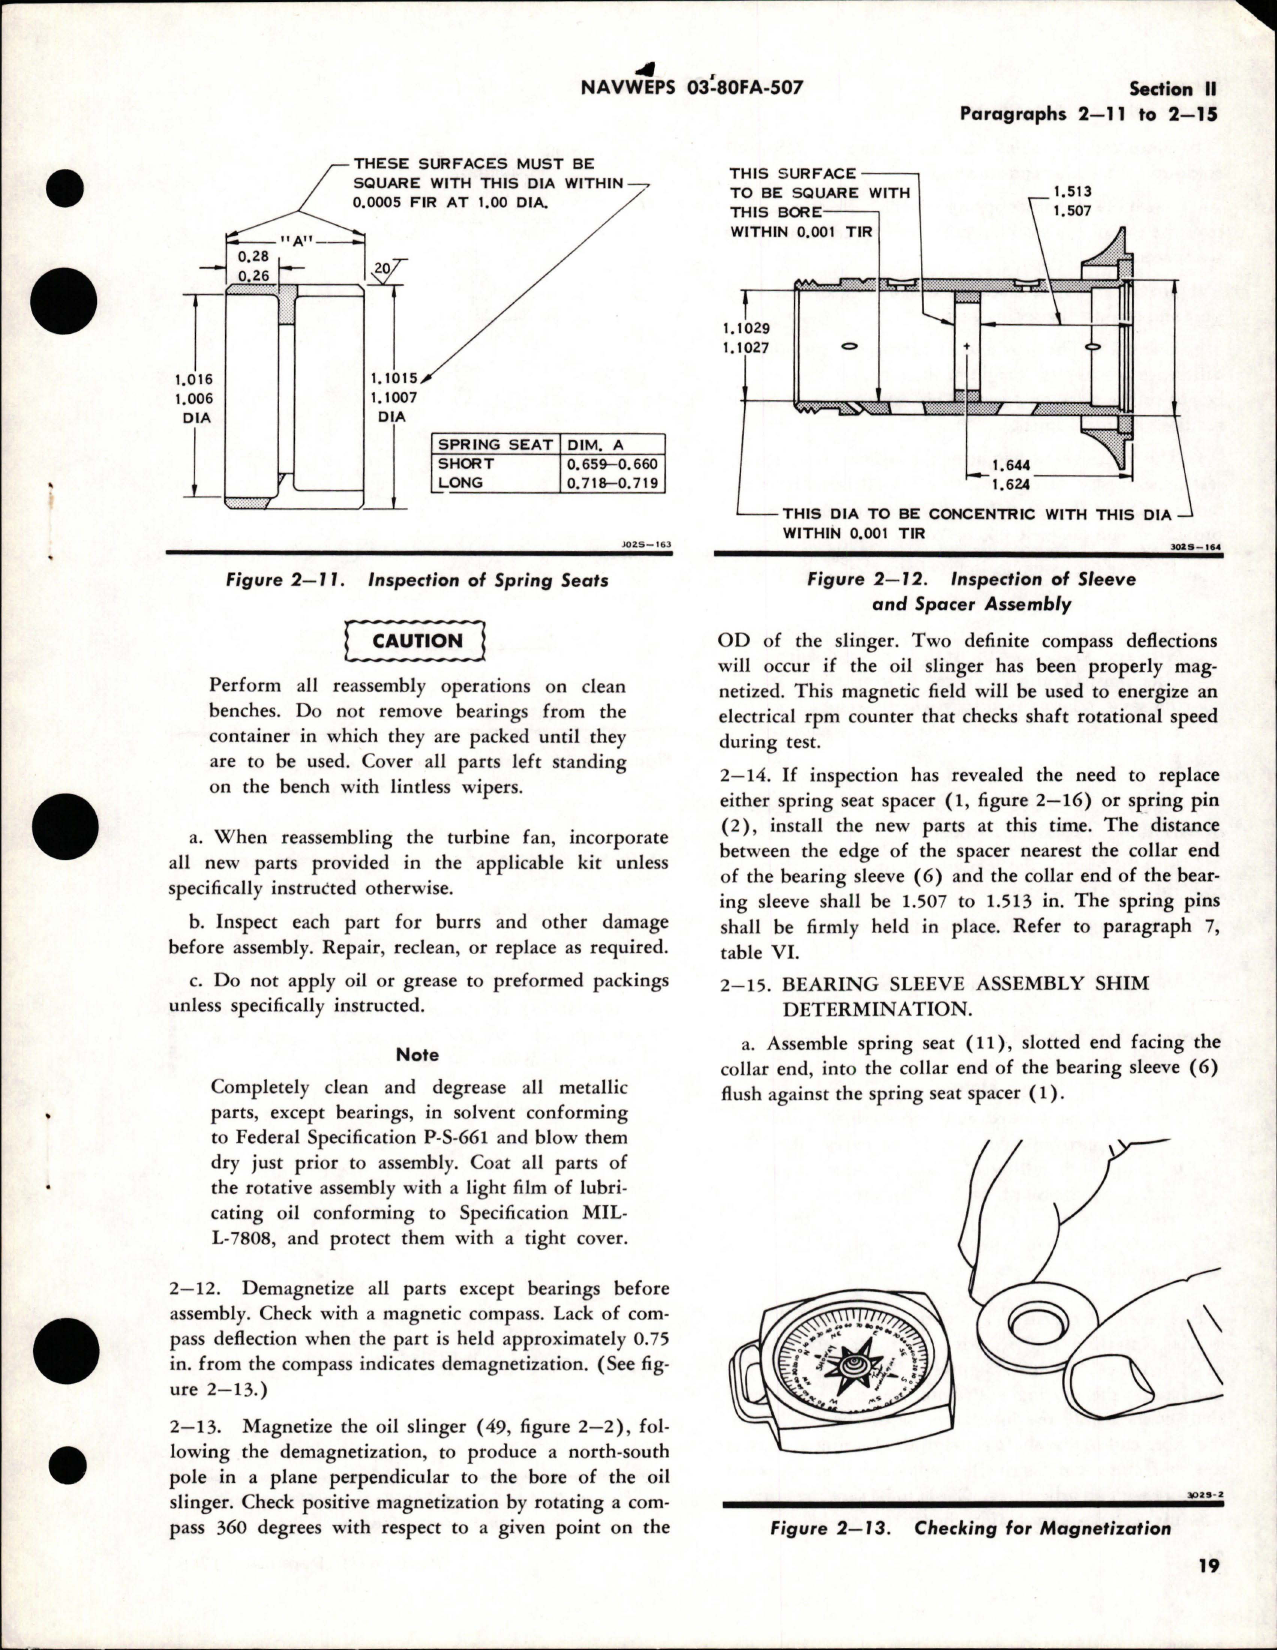 Sample page 5 from AirCorps Library document: Overhaul Instructions for Turbine Fan - Assemblies 519908, 519909, and 536928